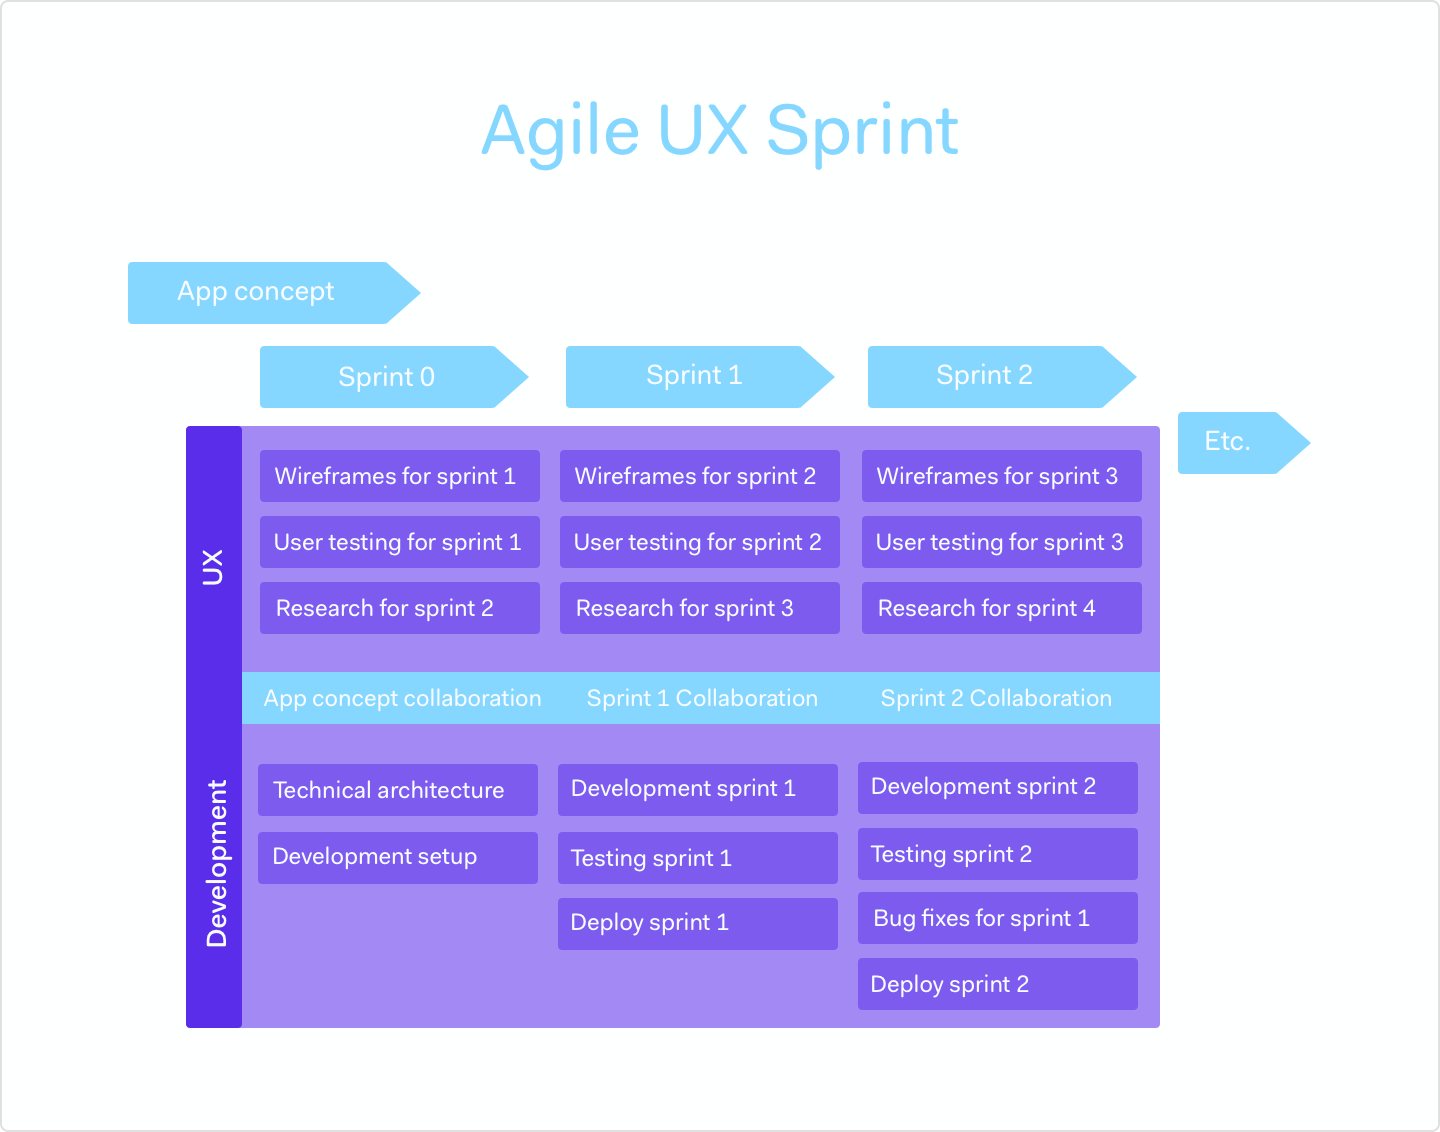 example of a design sprint using agile UX